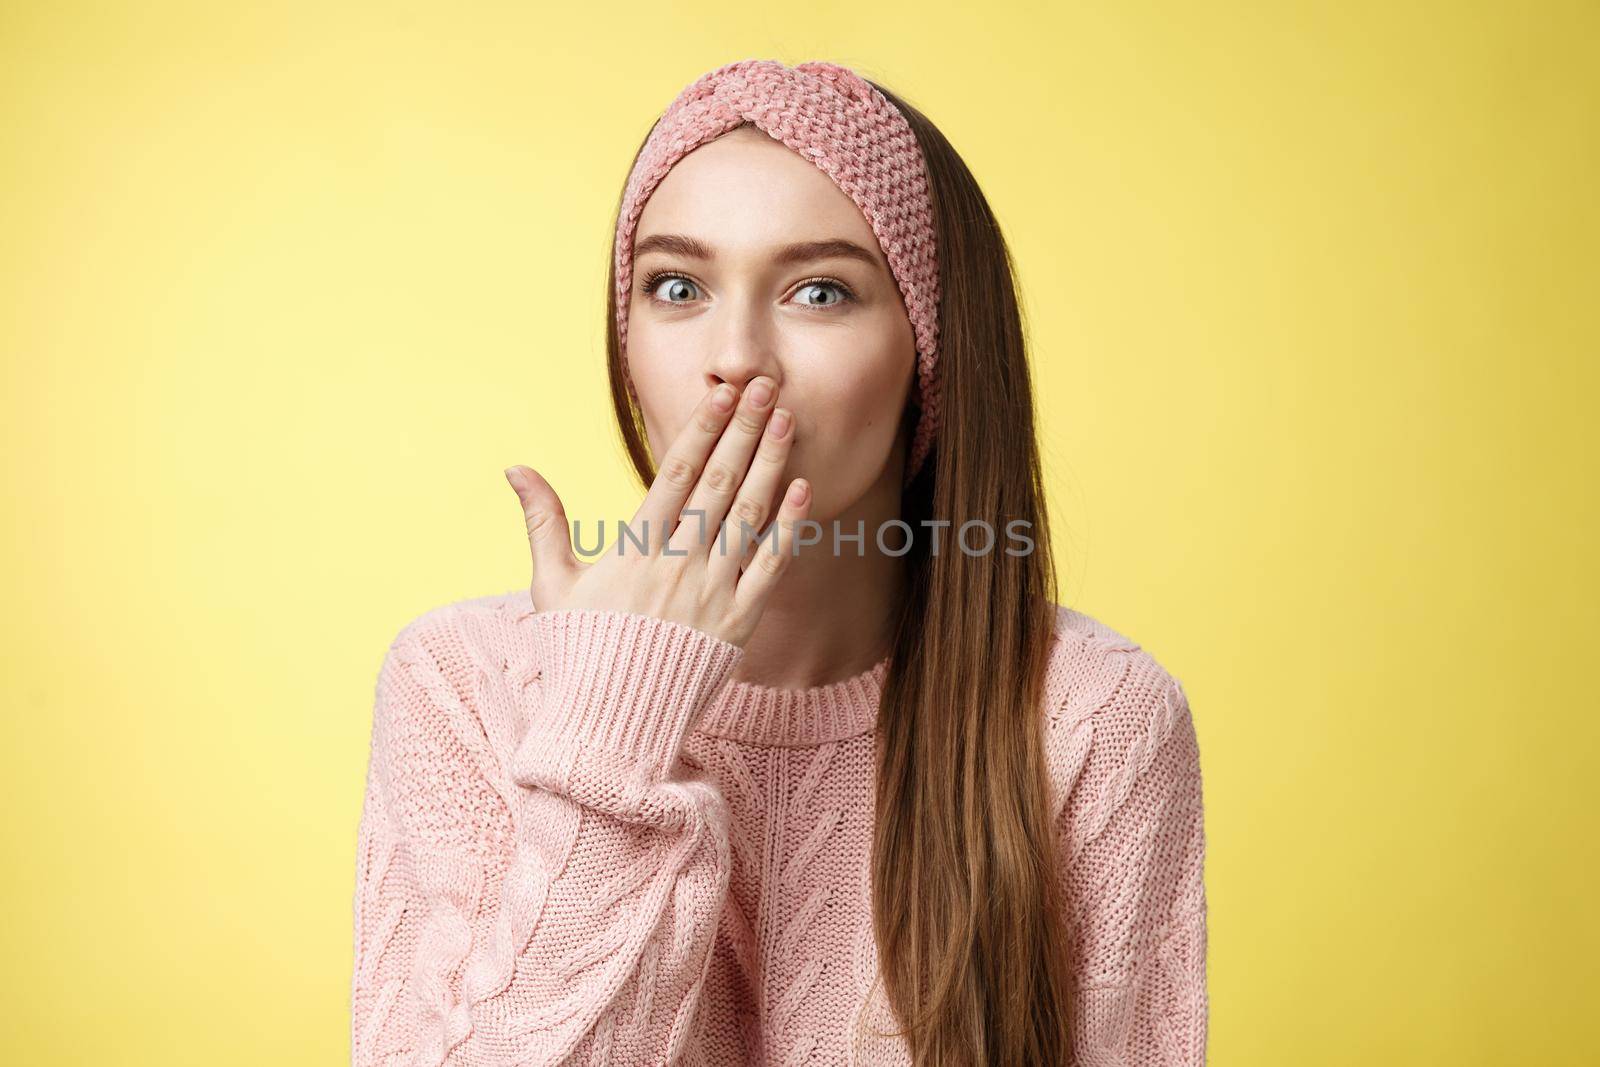 Talkative young cute office worker wearing sweater, knitted headband holding palm on mouth surprised and amazed, learning interesting shocking rumor, gossiping entertained over yellow wall.